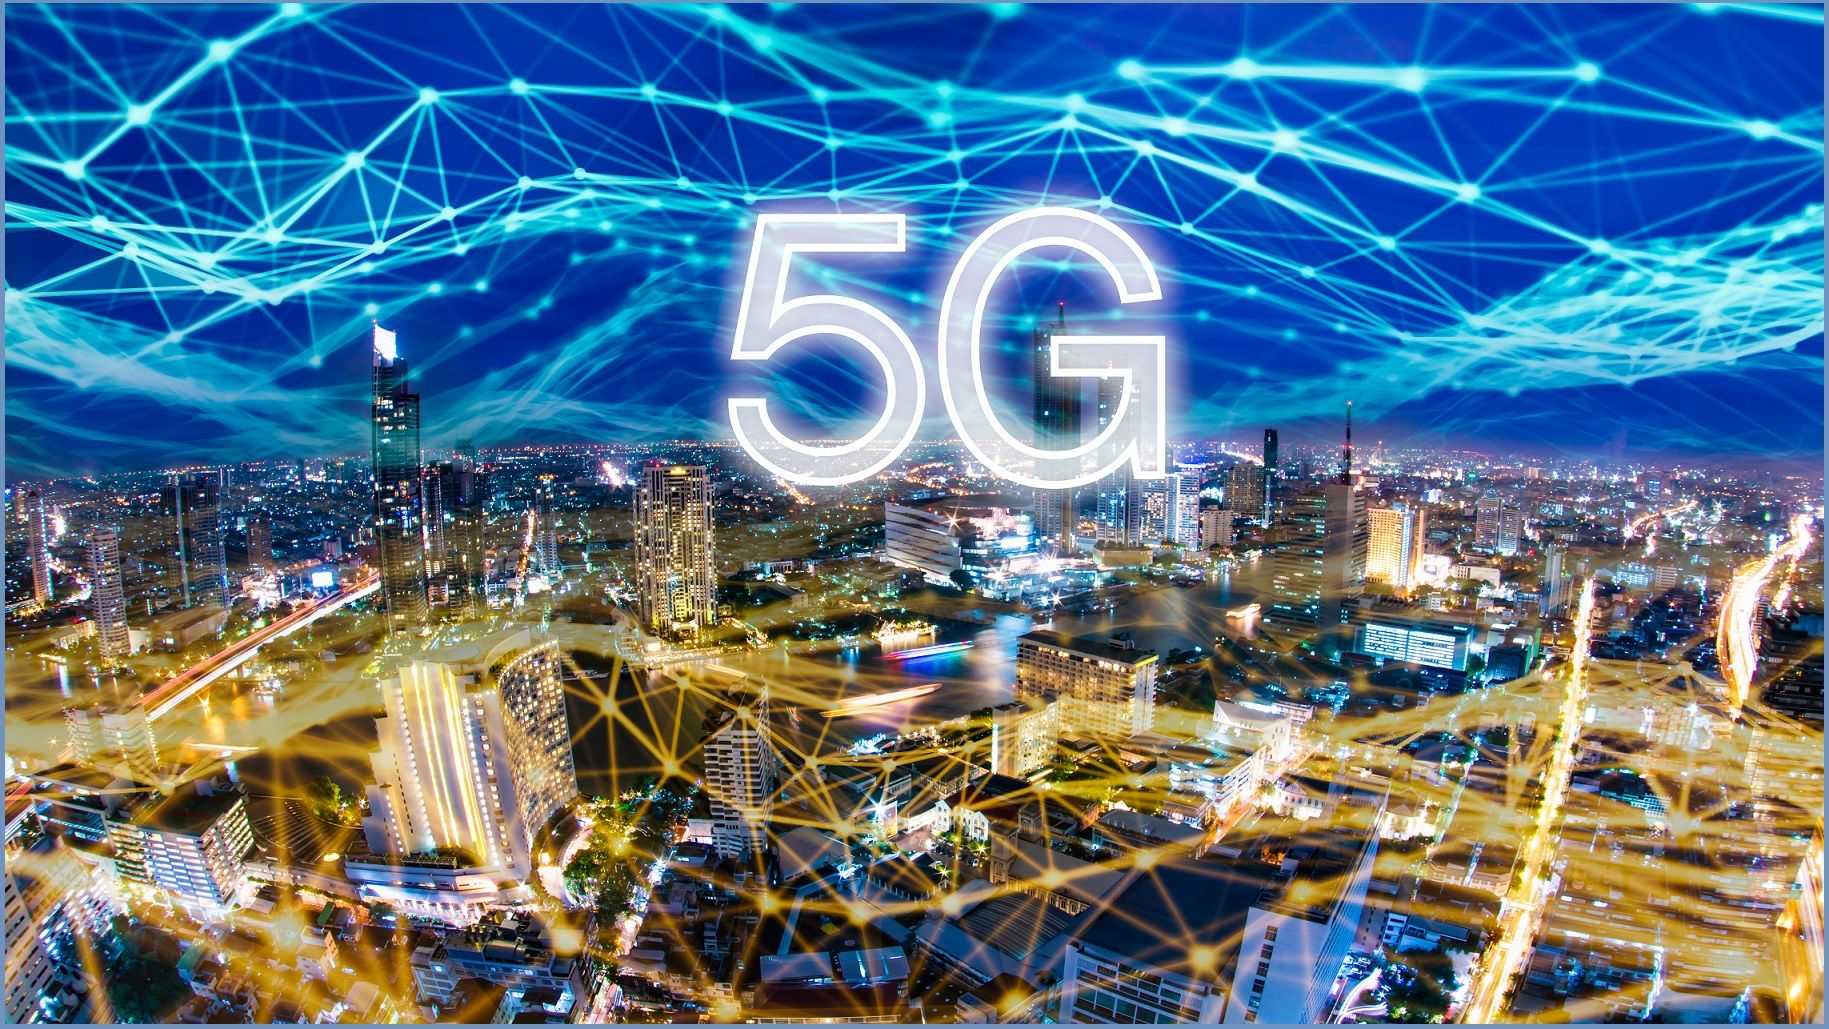 Who will win the race for 5G auction - Airtel, Vodafone Idea, or Reliance?